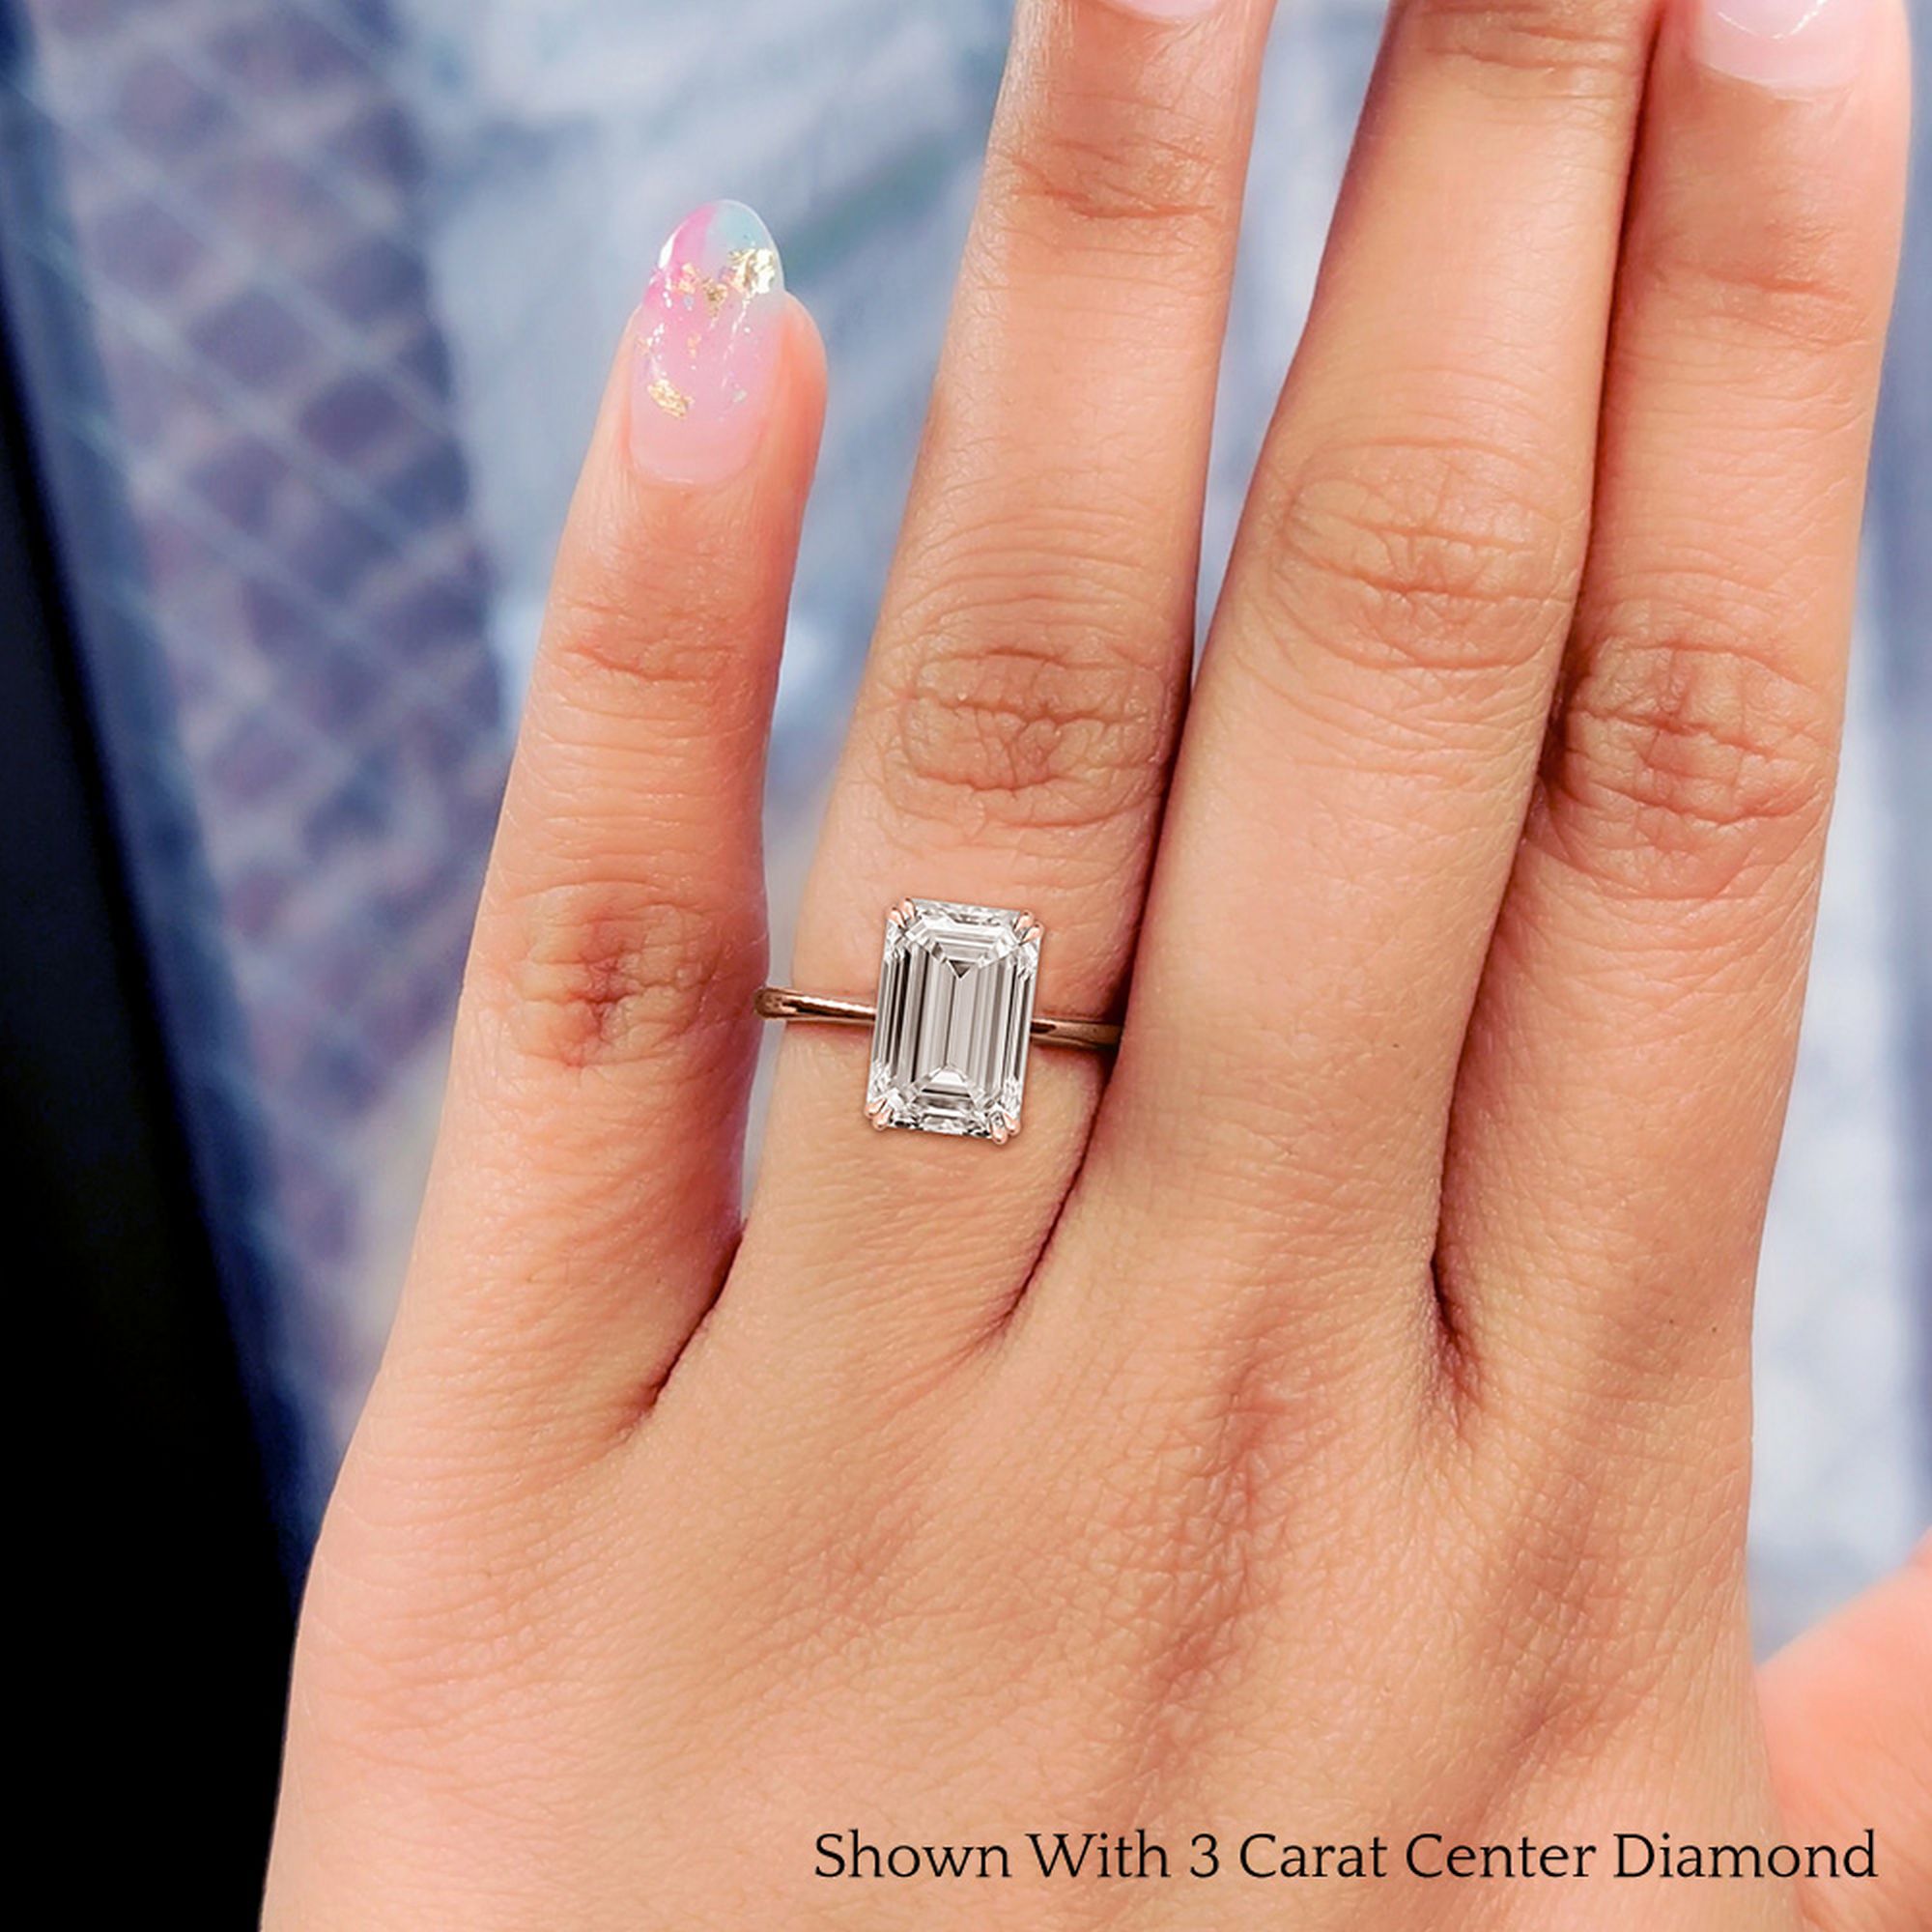 Emerald cut diamond engagement ring in rose gold